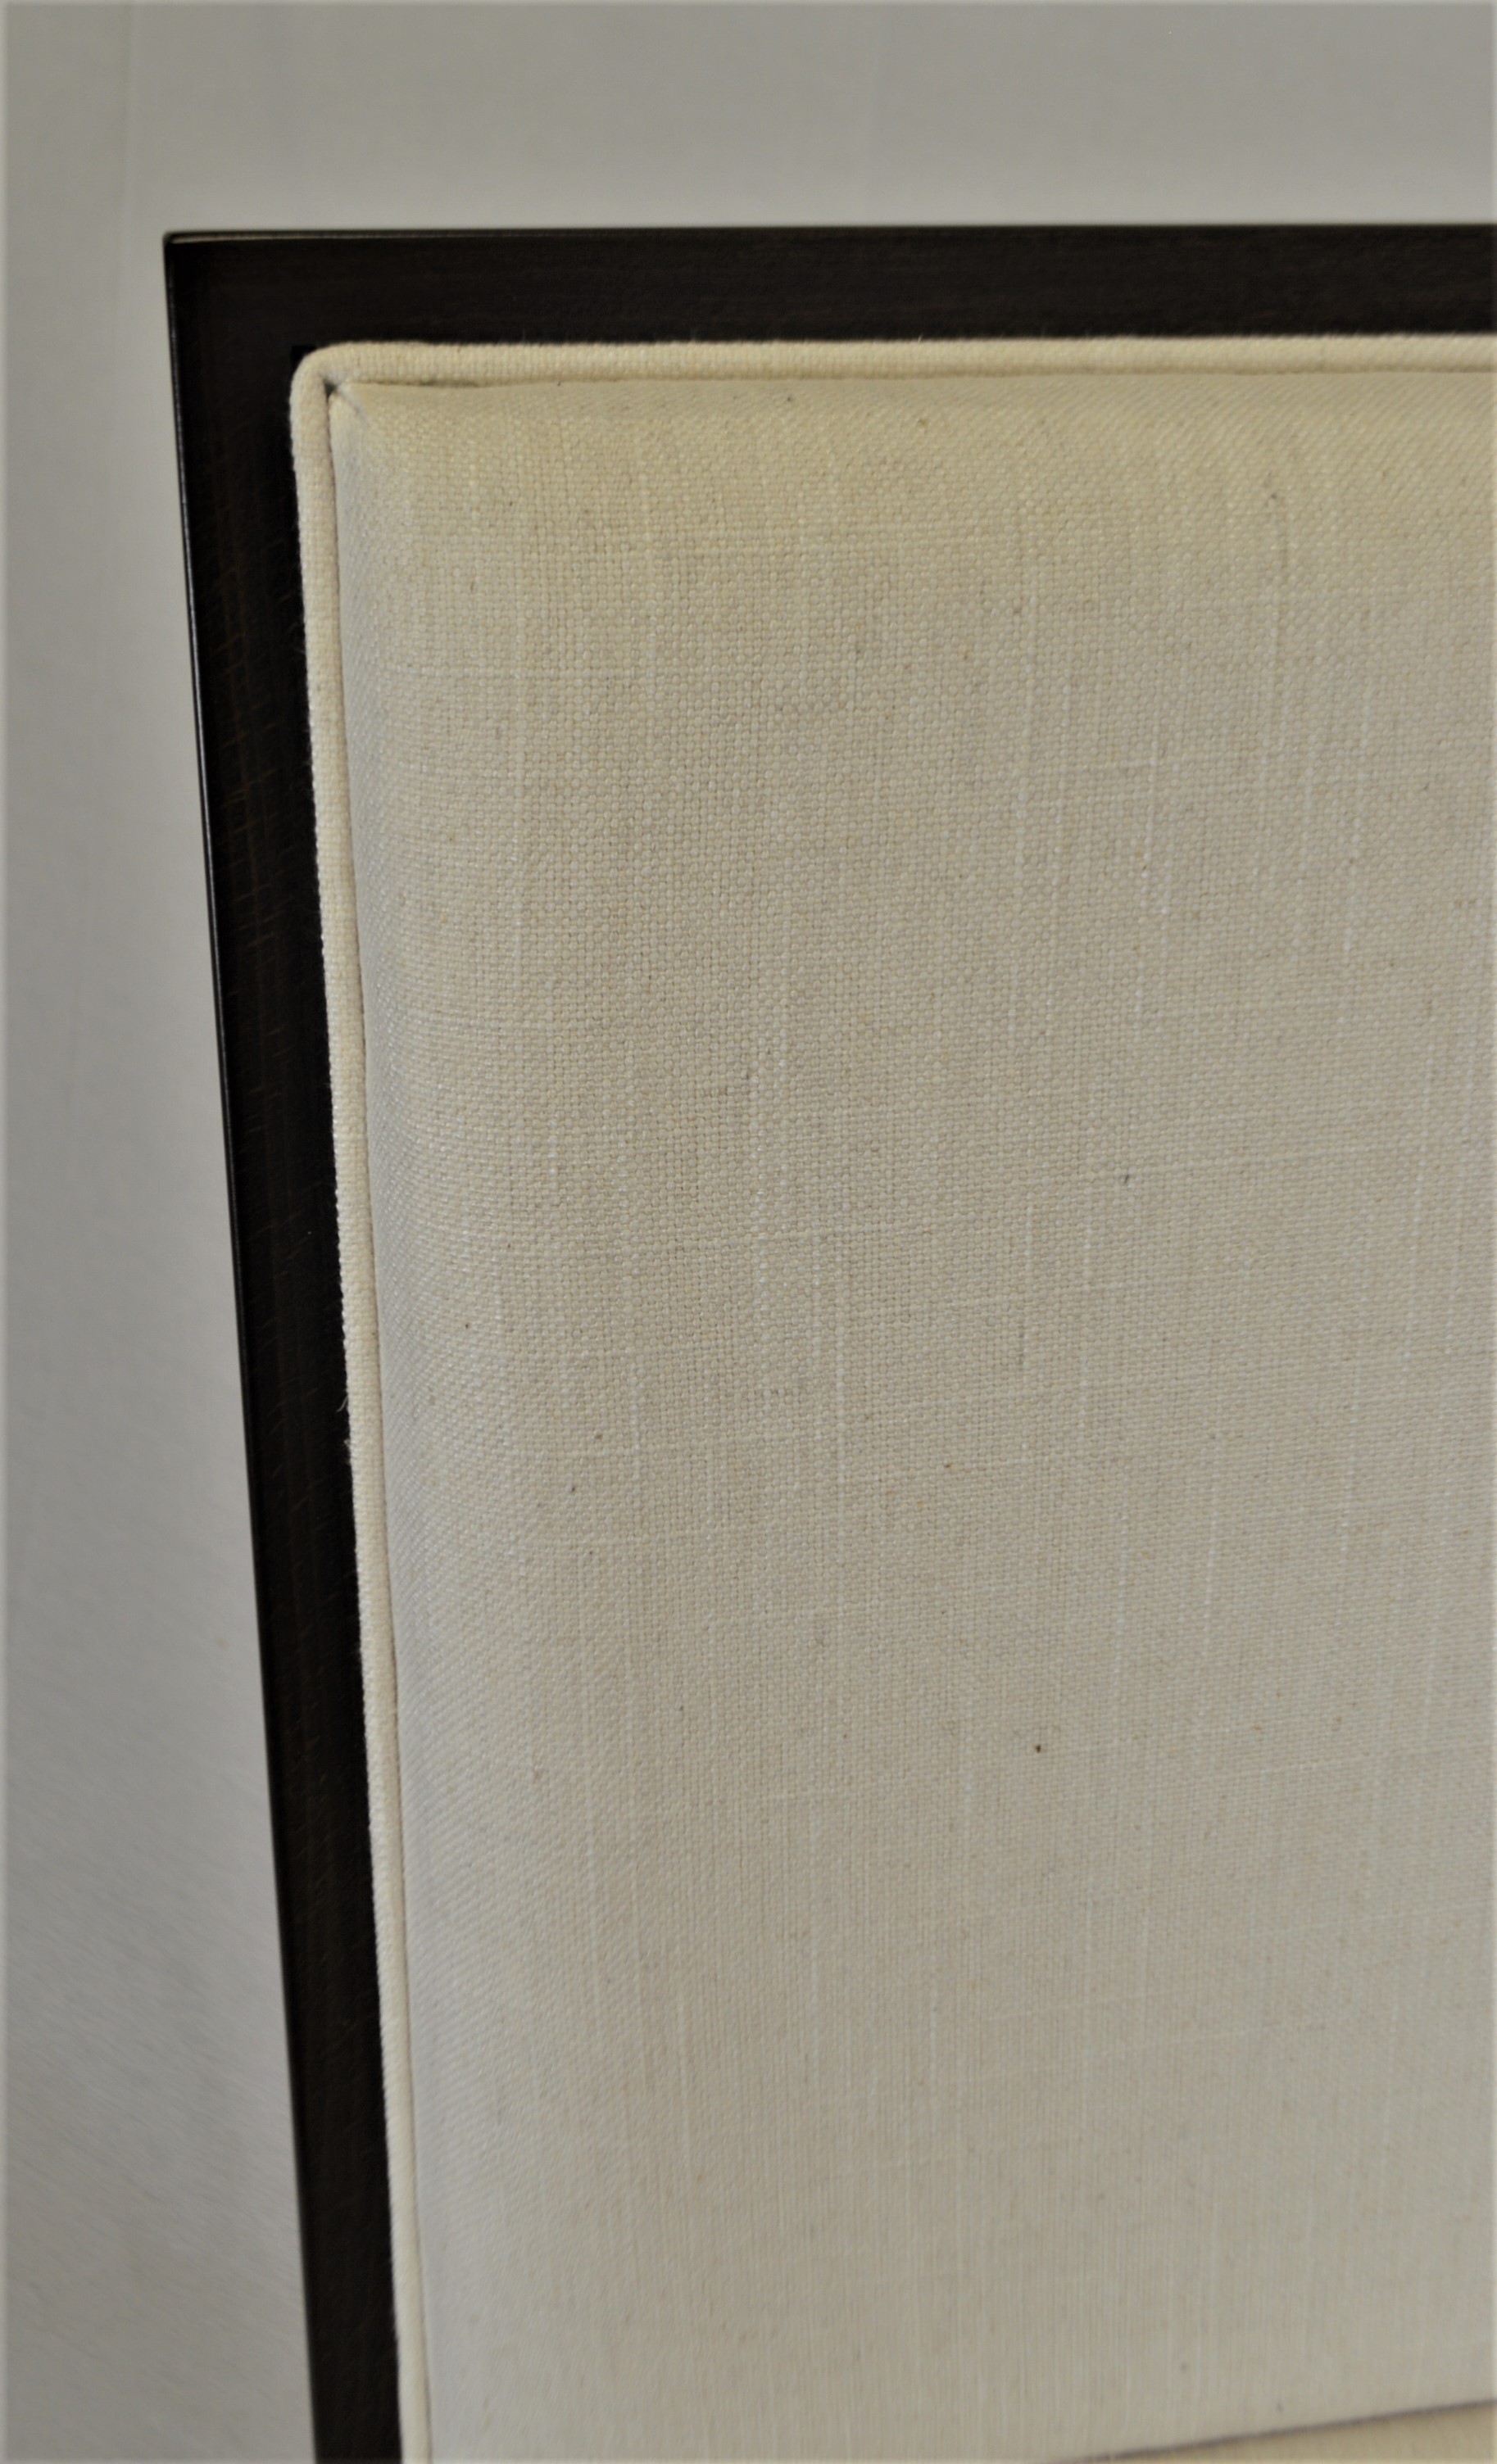 products/637-close-up-side-of-chair-back